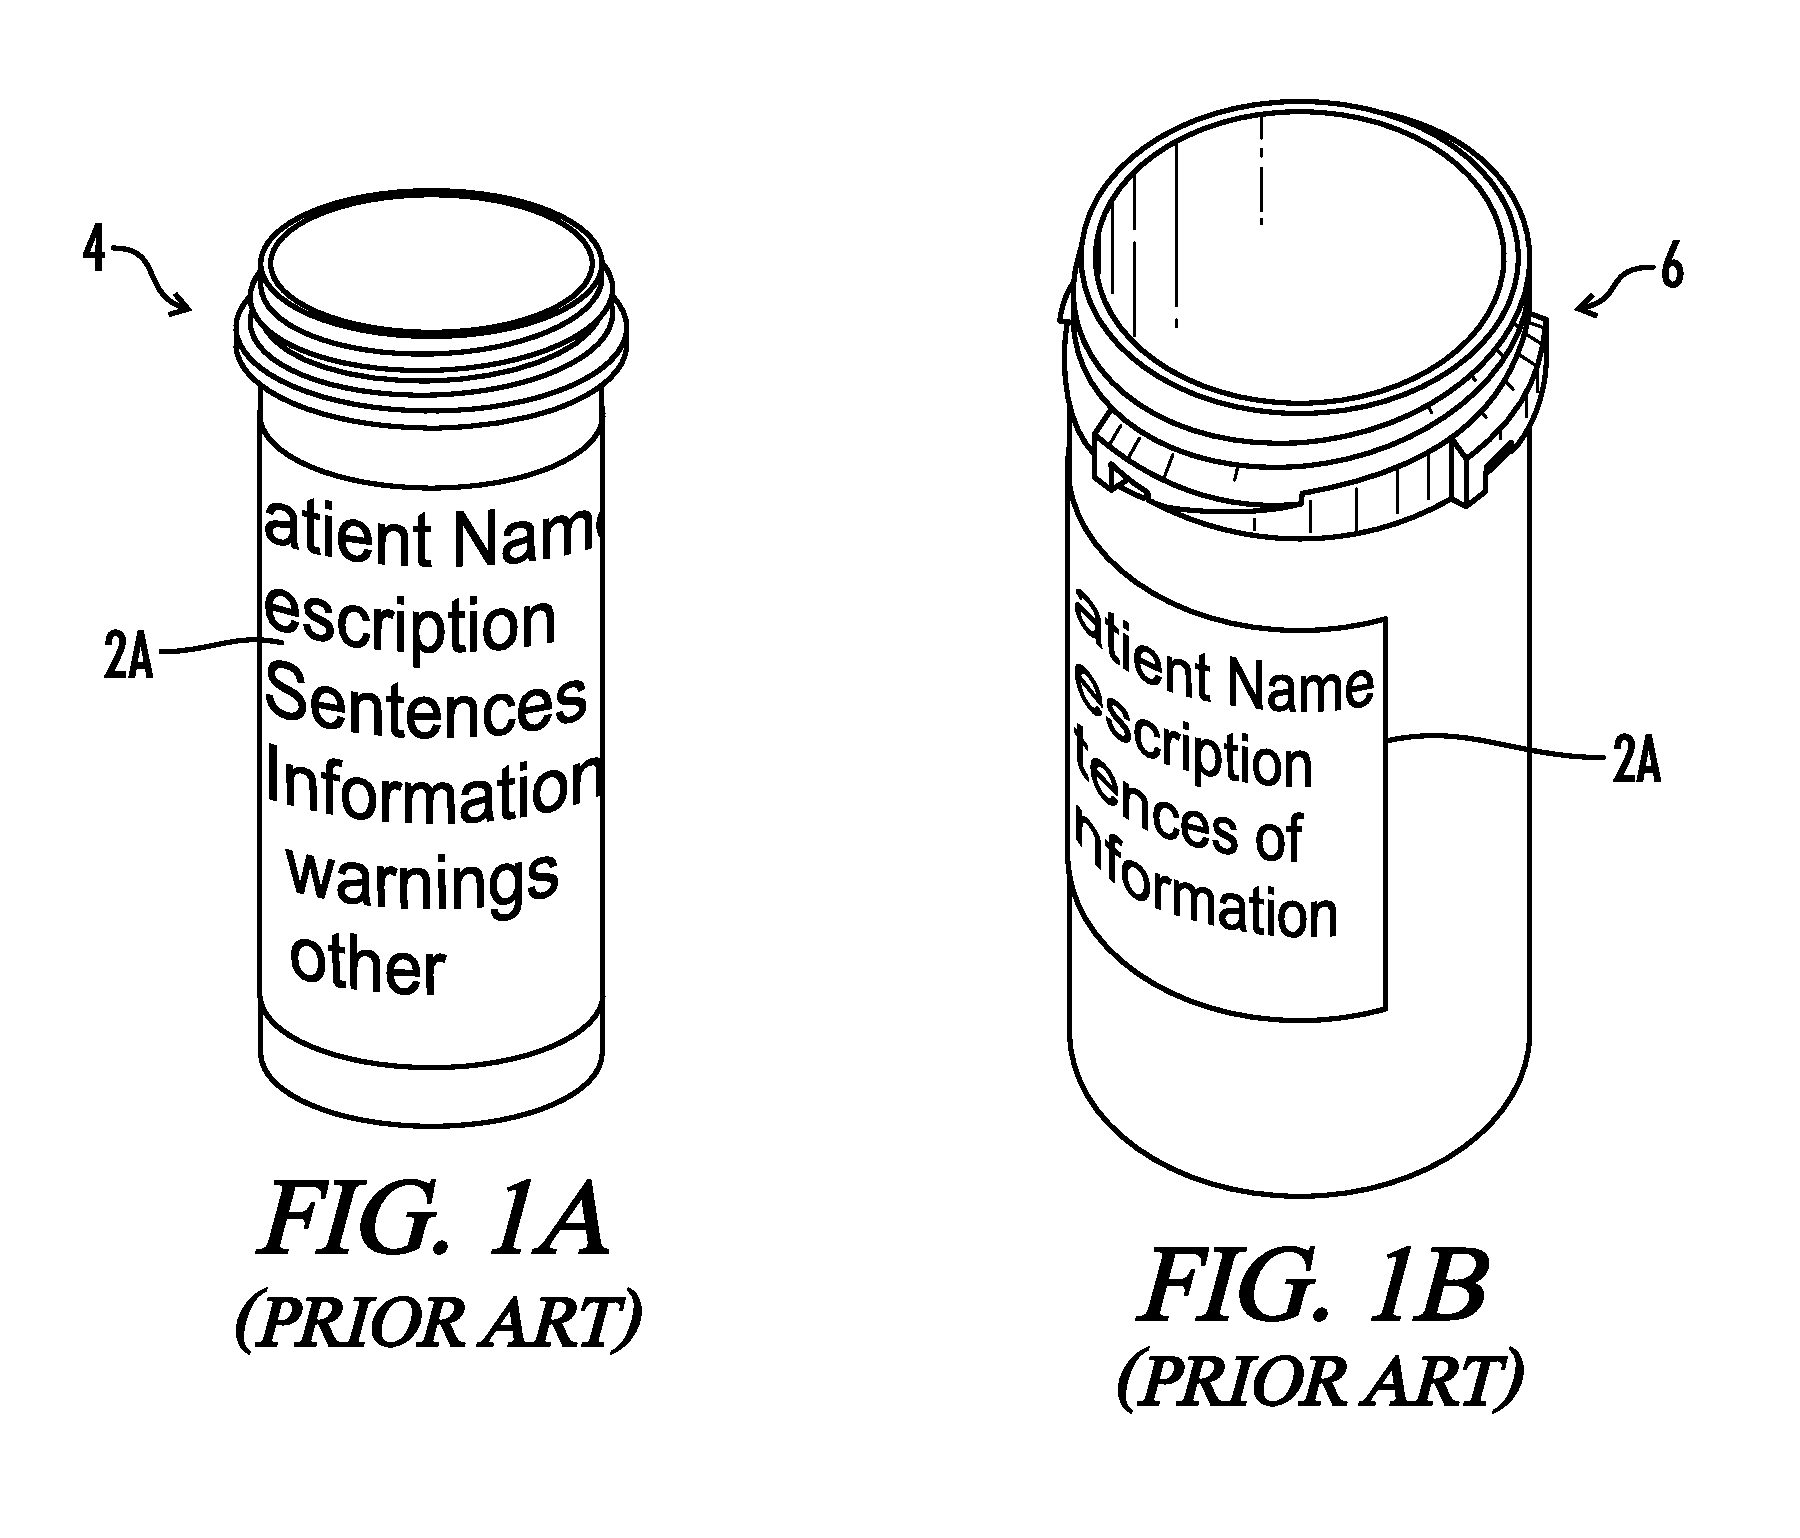 Labels With Multiple Designs For Prescription Containers